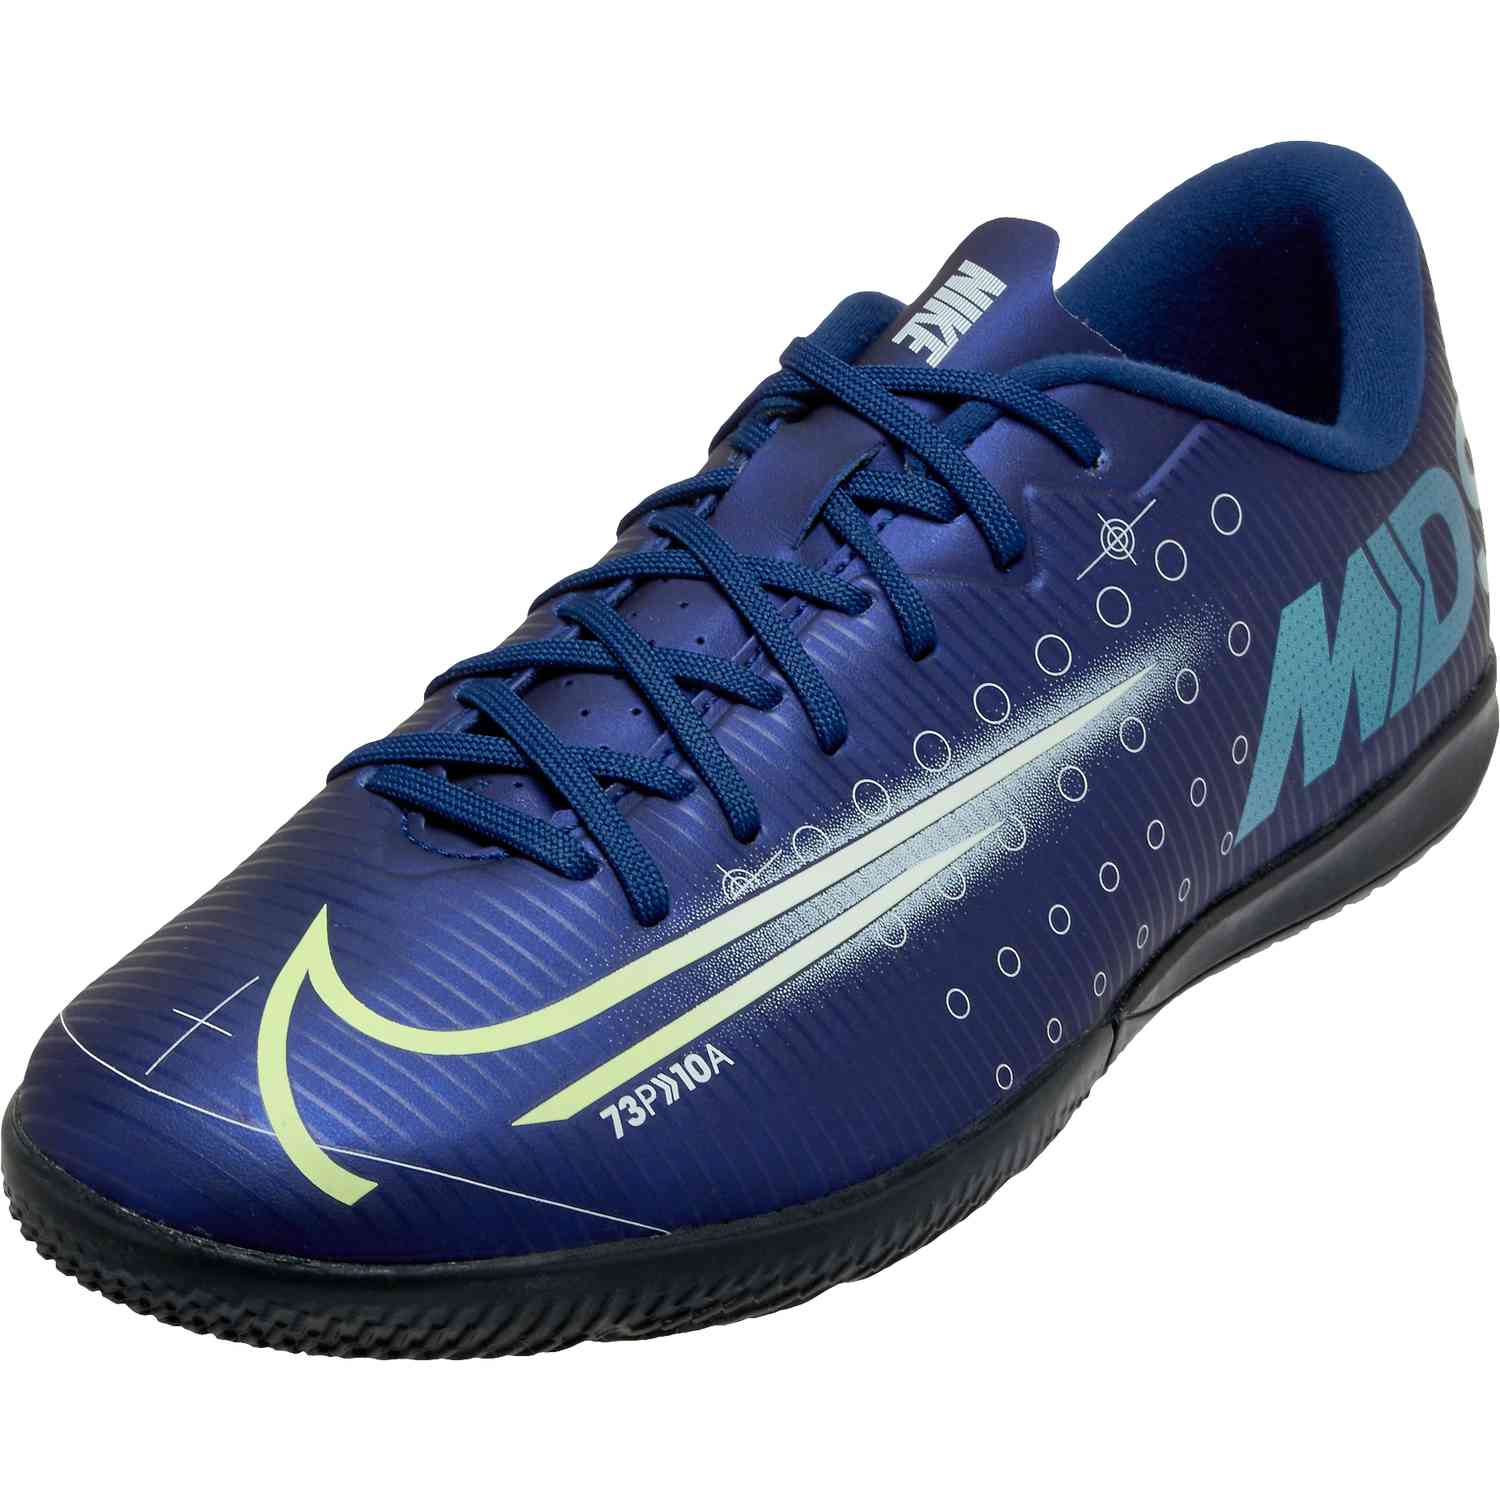 Nike Junior Vapor 13 Club MDS IC Soccer Shoes Blue Void.